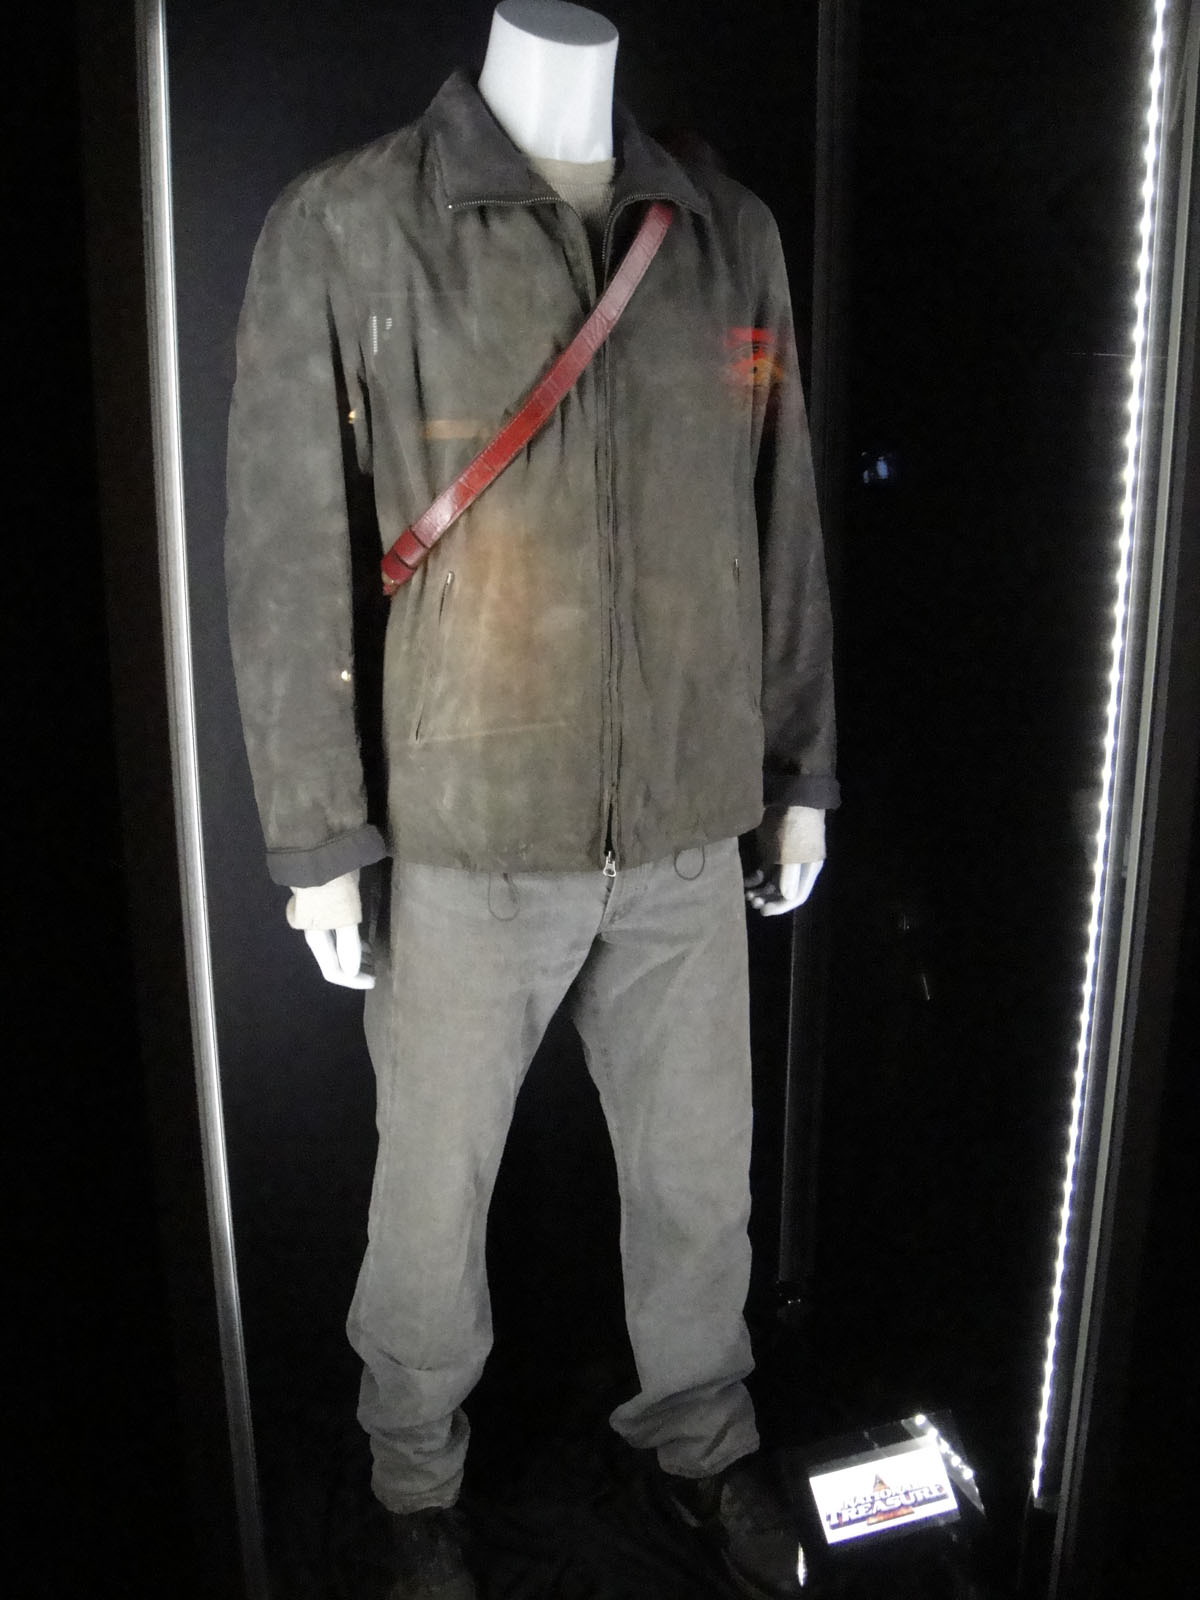 a display of a uniform and tie that is worn by the movie actor